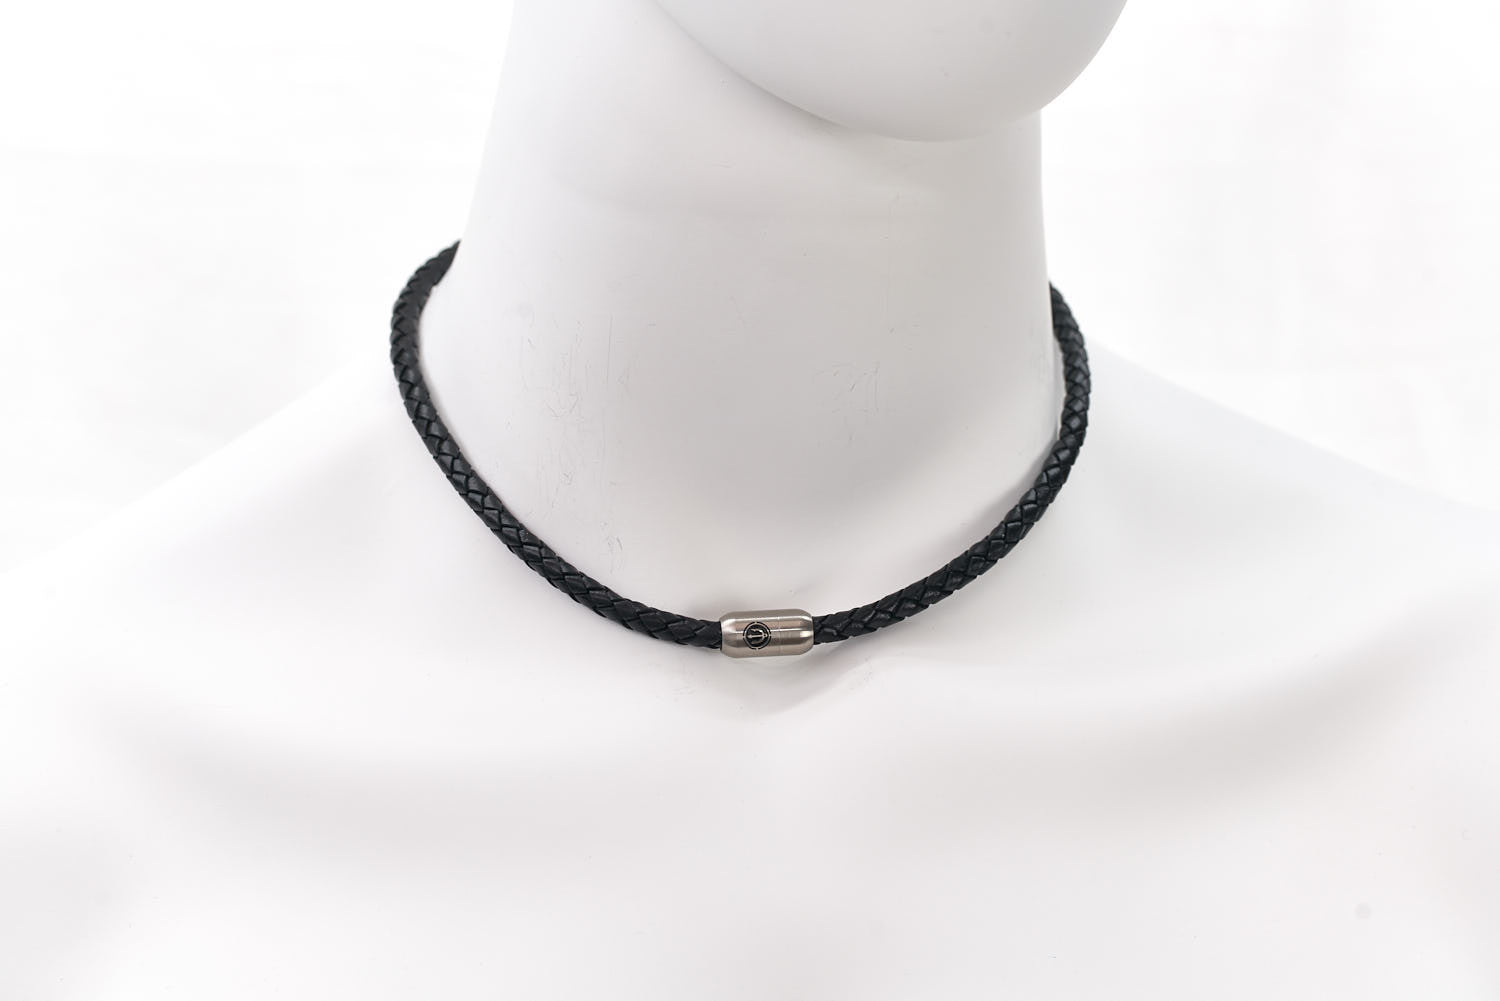 Amor Cord Necklace